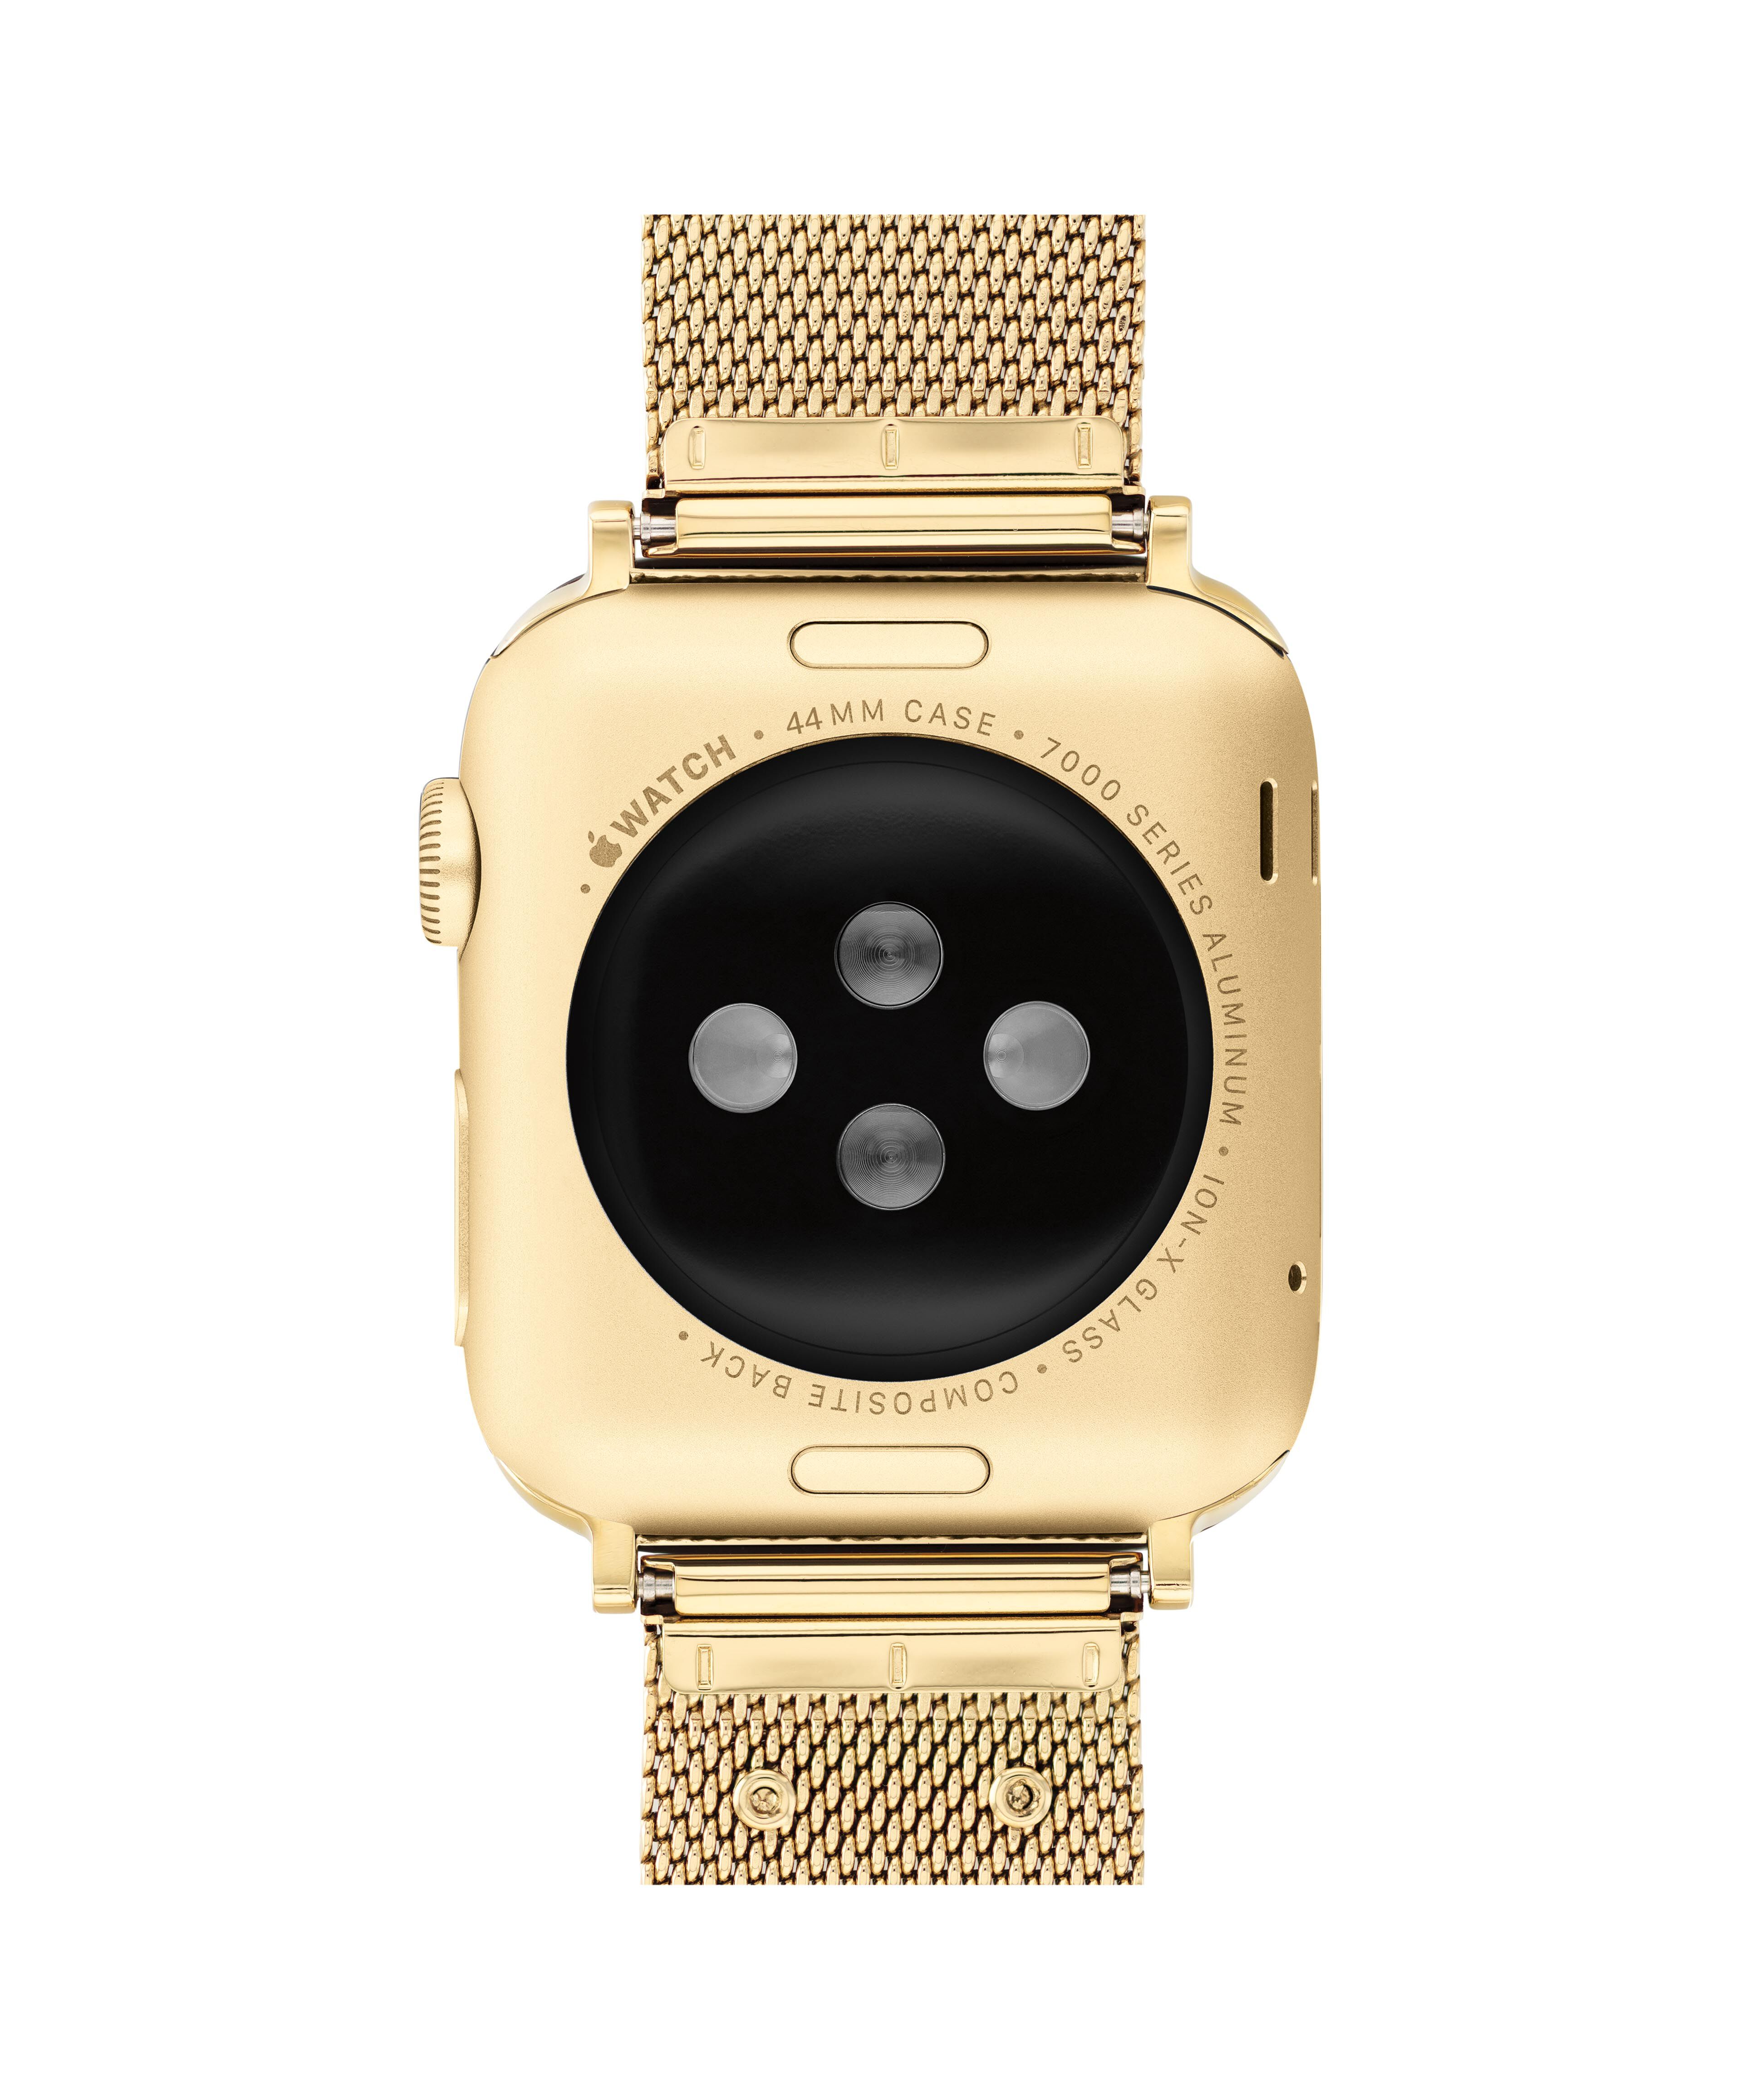 Coach Men's Yellow Gold Plated Stainless Steel Apple Watch Strap 14700064